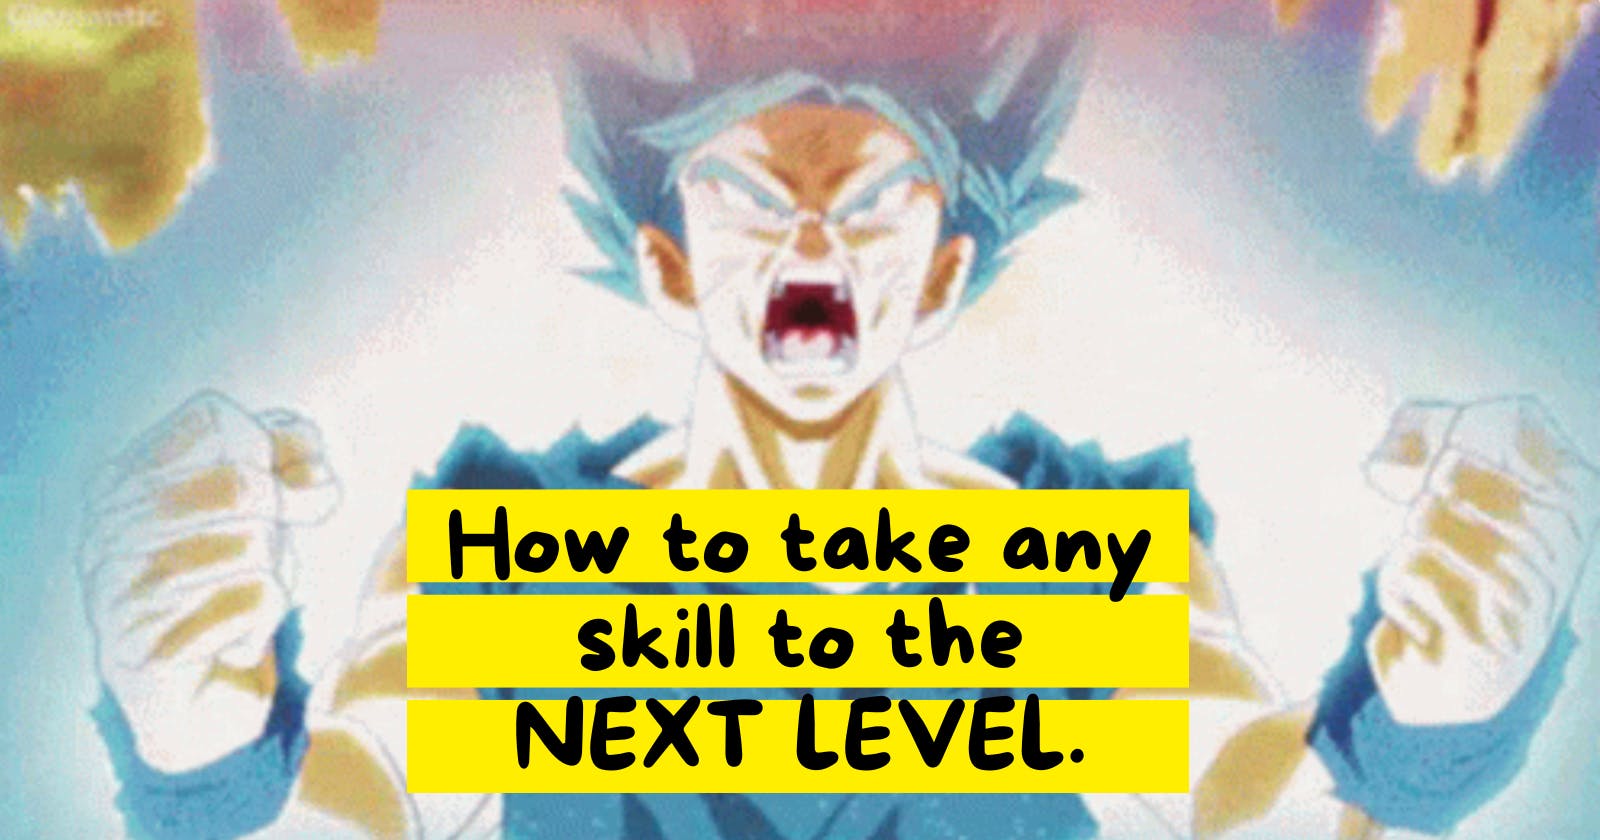 How to take any skill to the next level